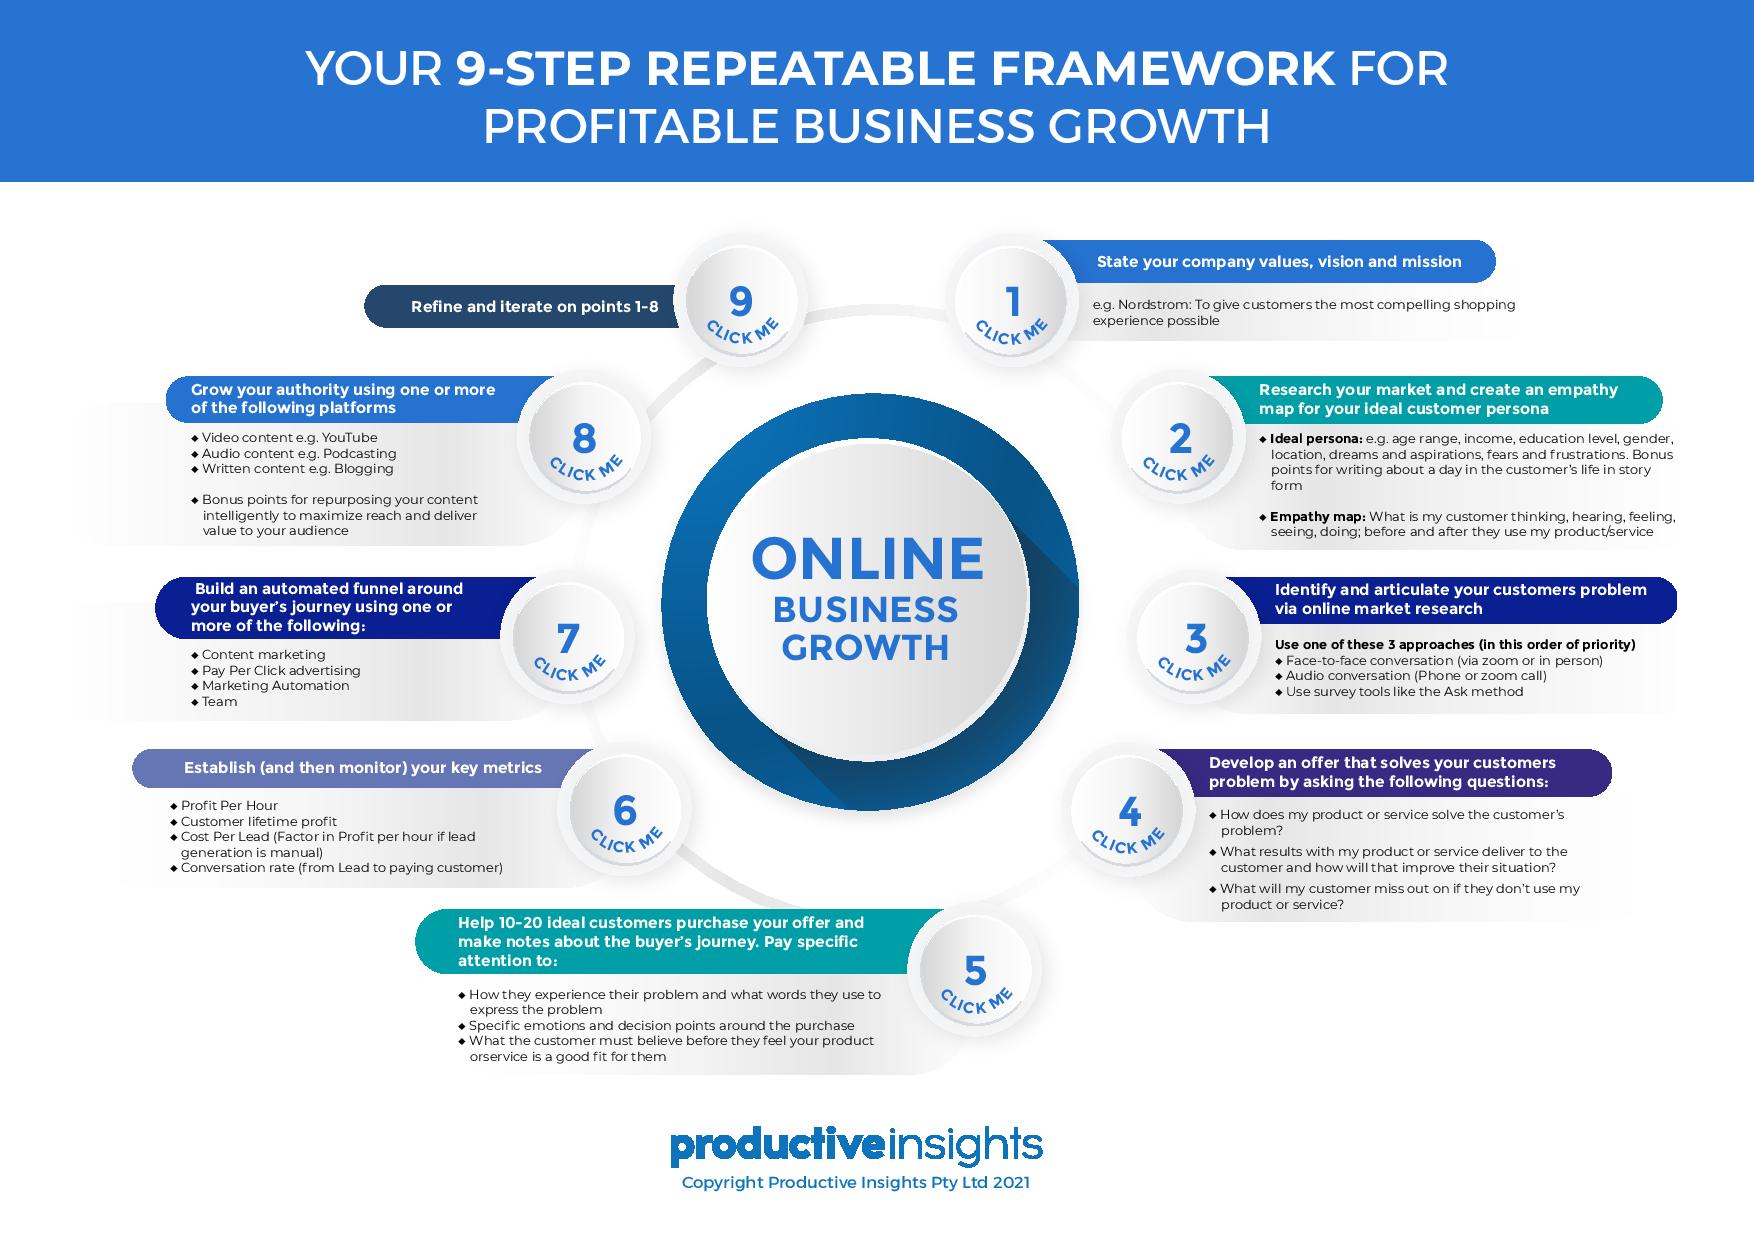 Your 9-Step Repeatable Business Framework